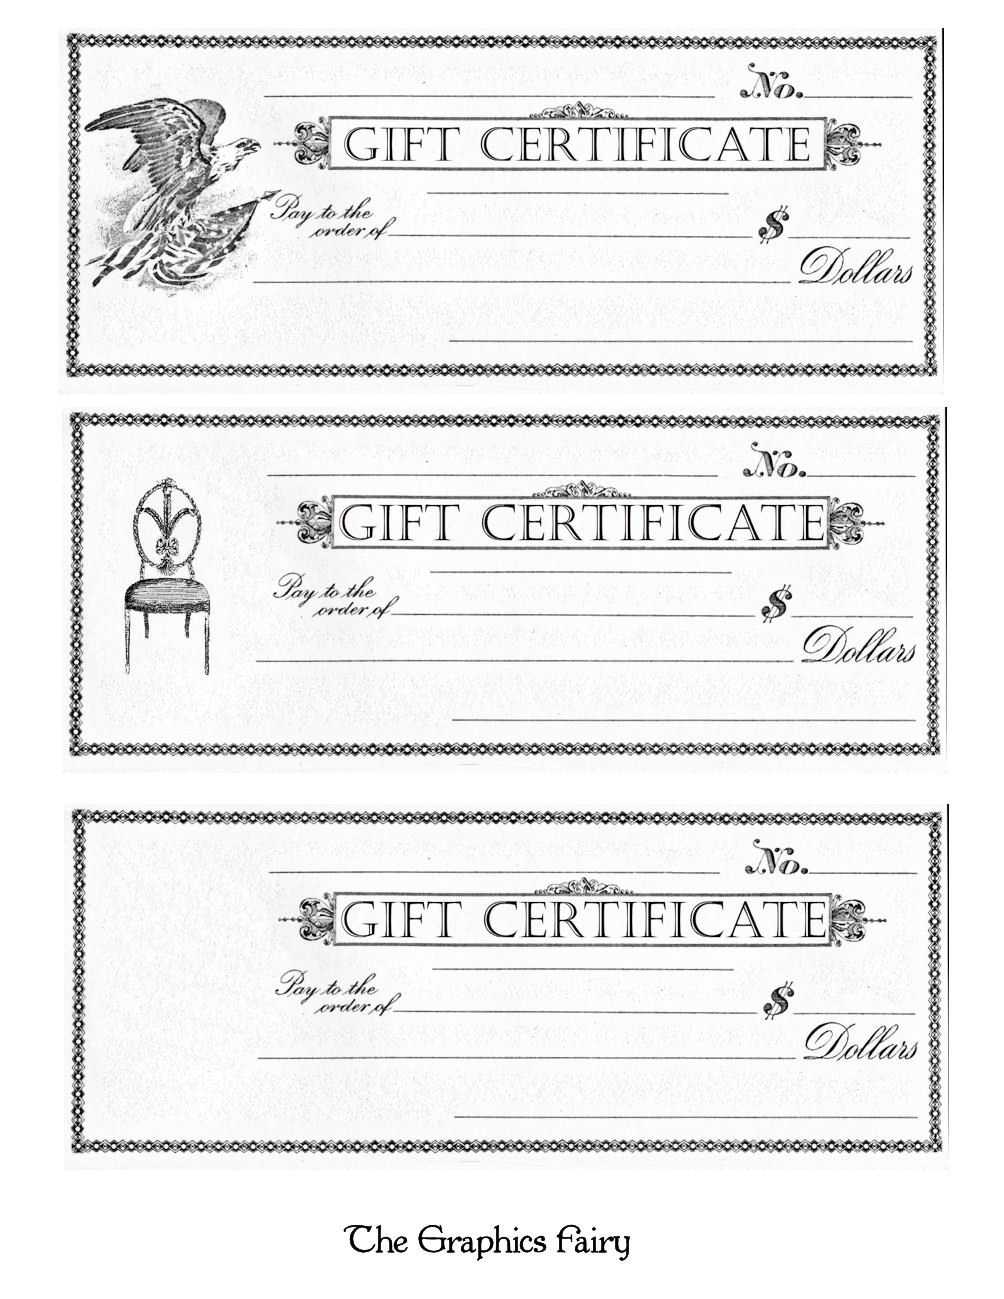 Free Printable   Gift Certificates   The Graphics Fairy